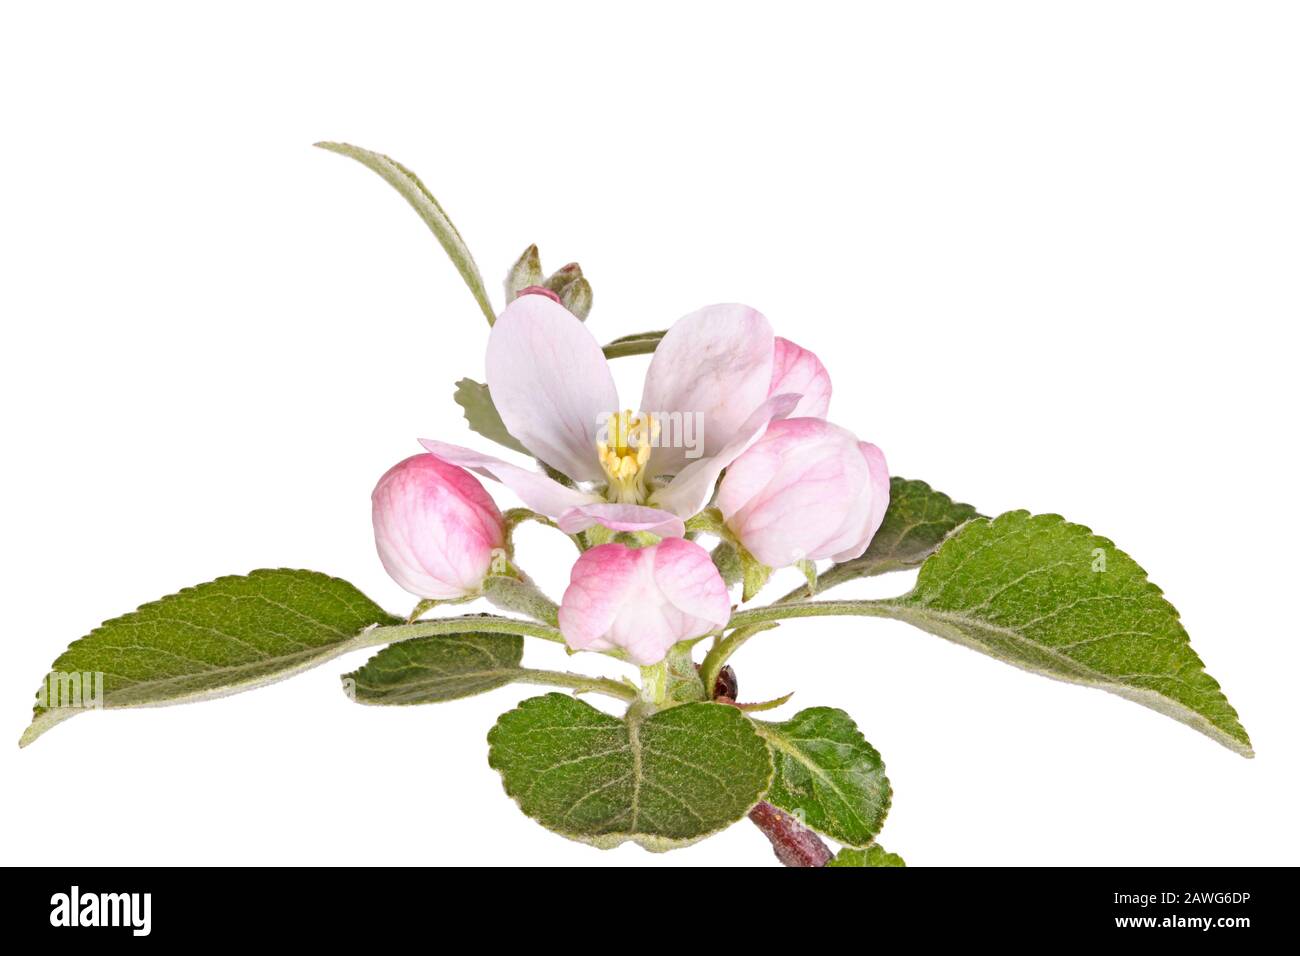 Open flower, numerous buds and new spring leaves of an apple tree (Malus domestica) isolated against a white background Stock Photo